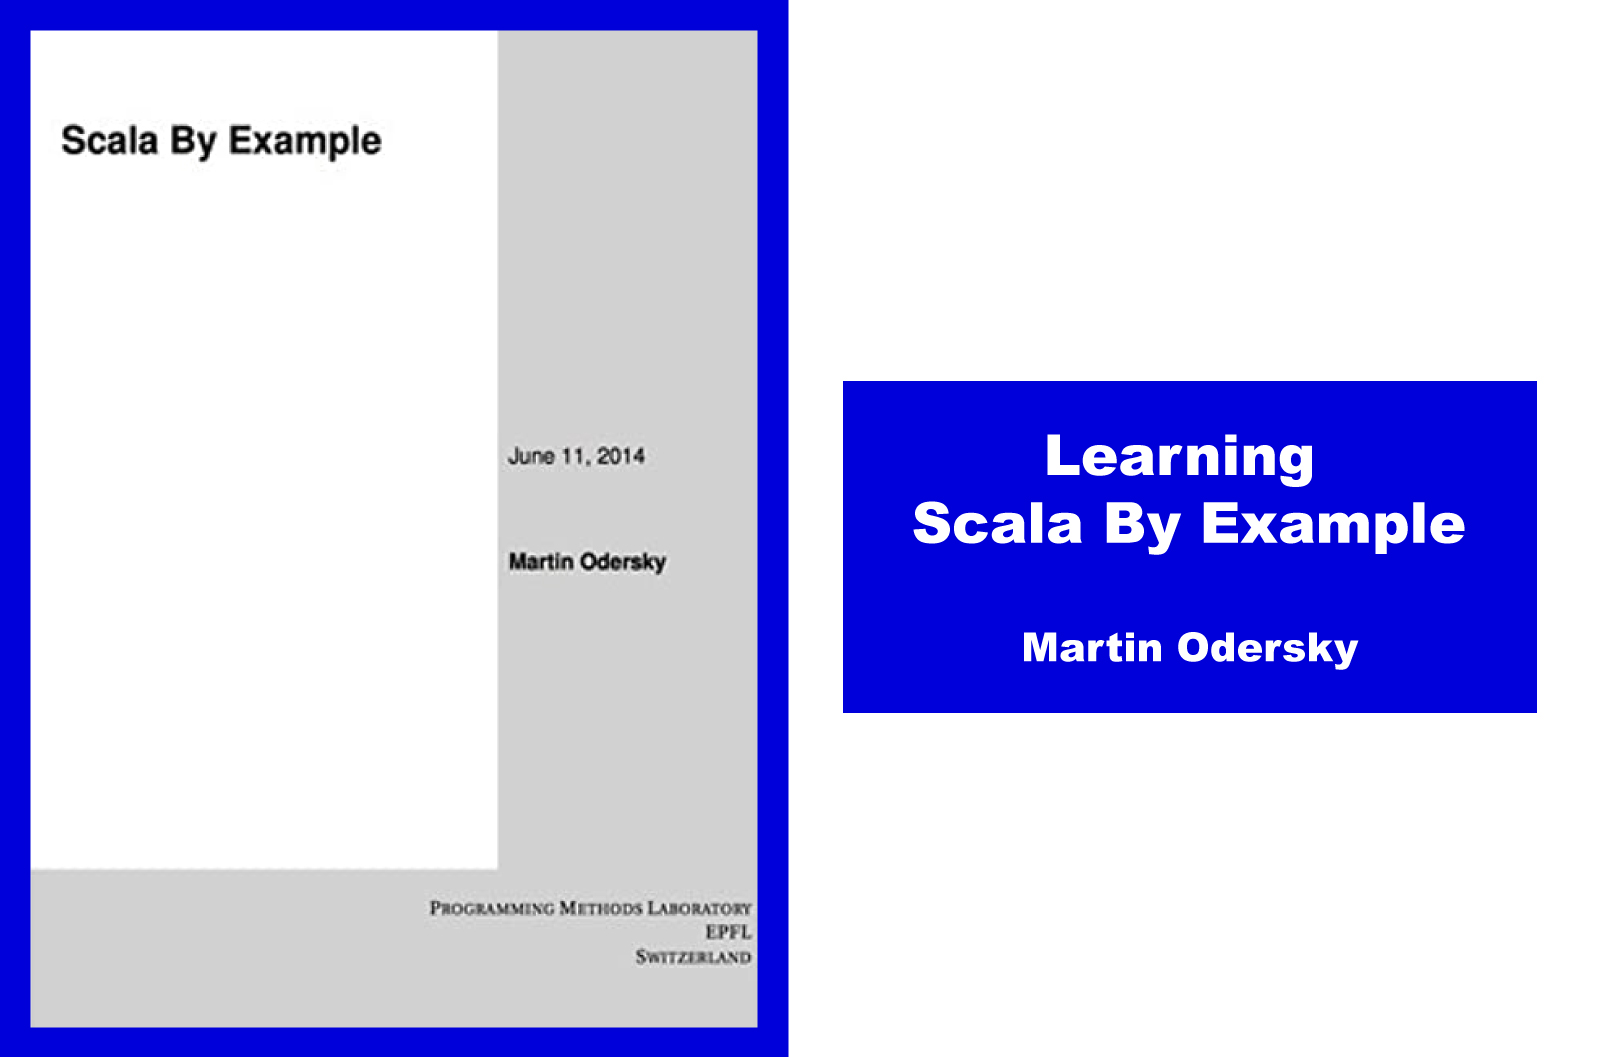 Learning Scala by Example